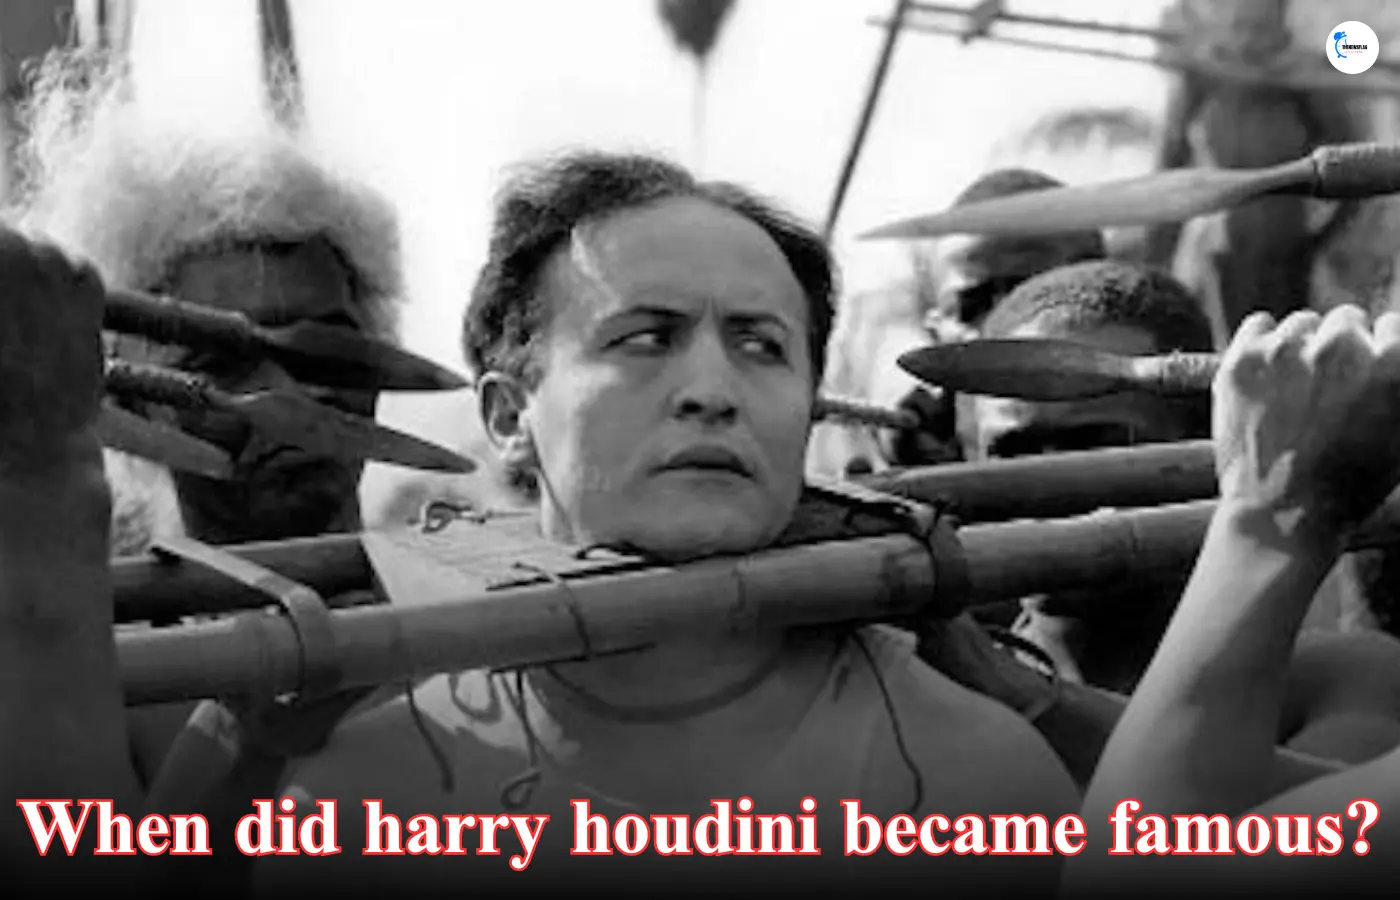 When did harry houdini became famous?